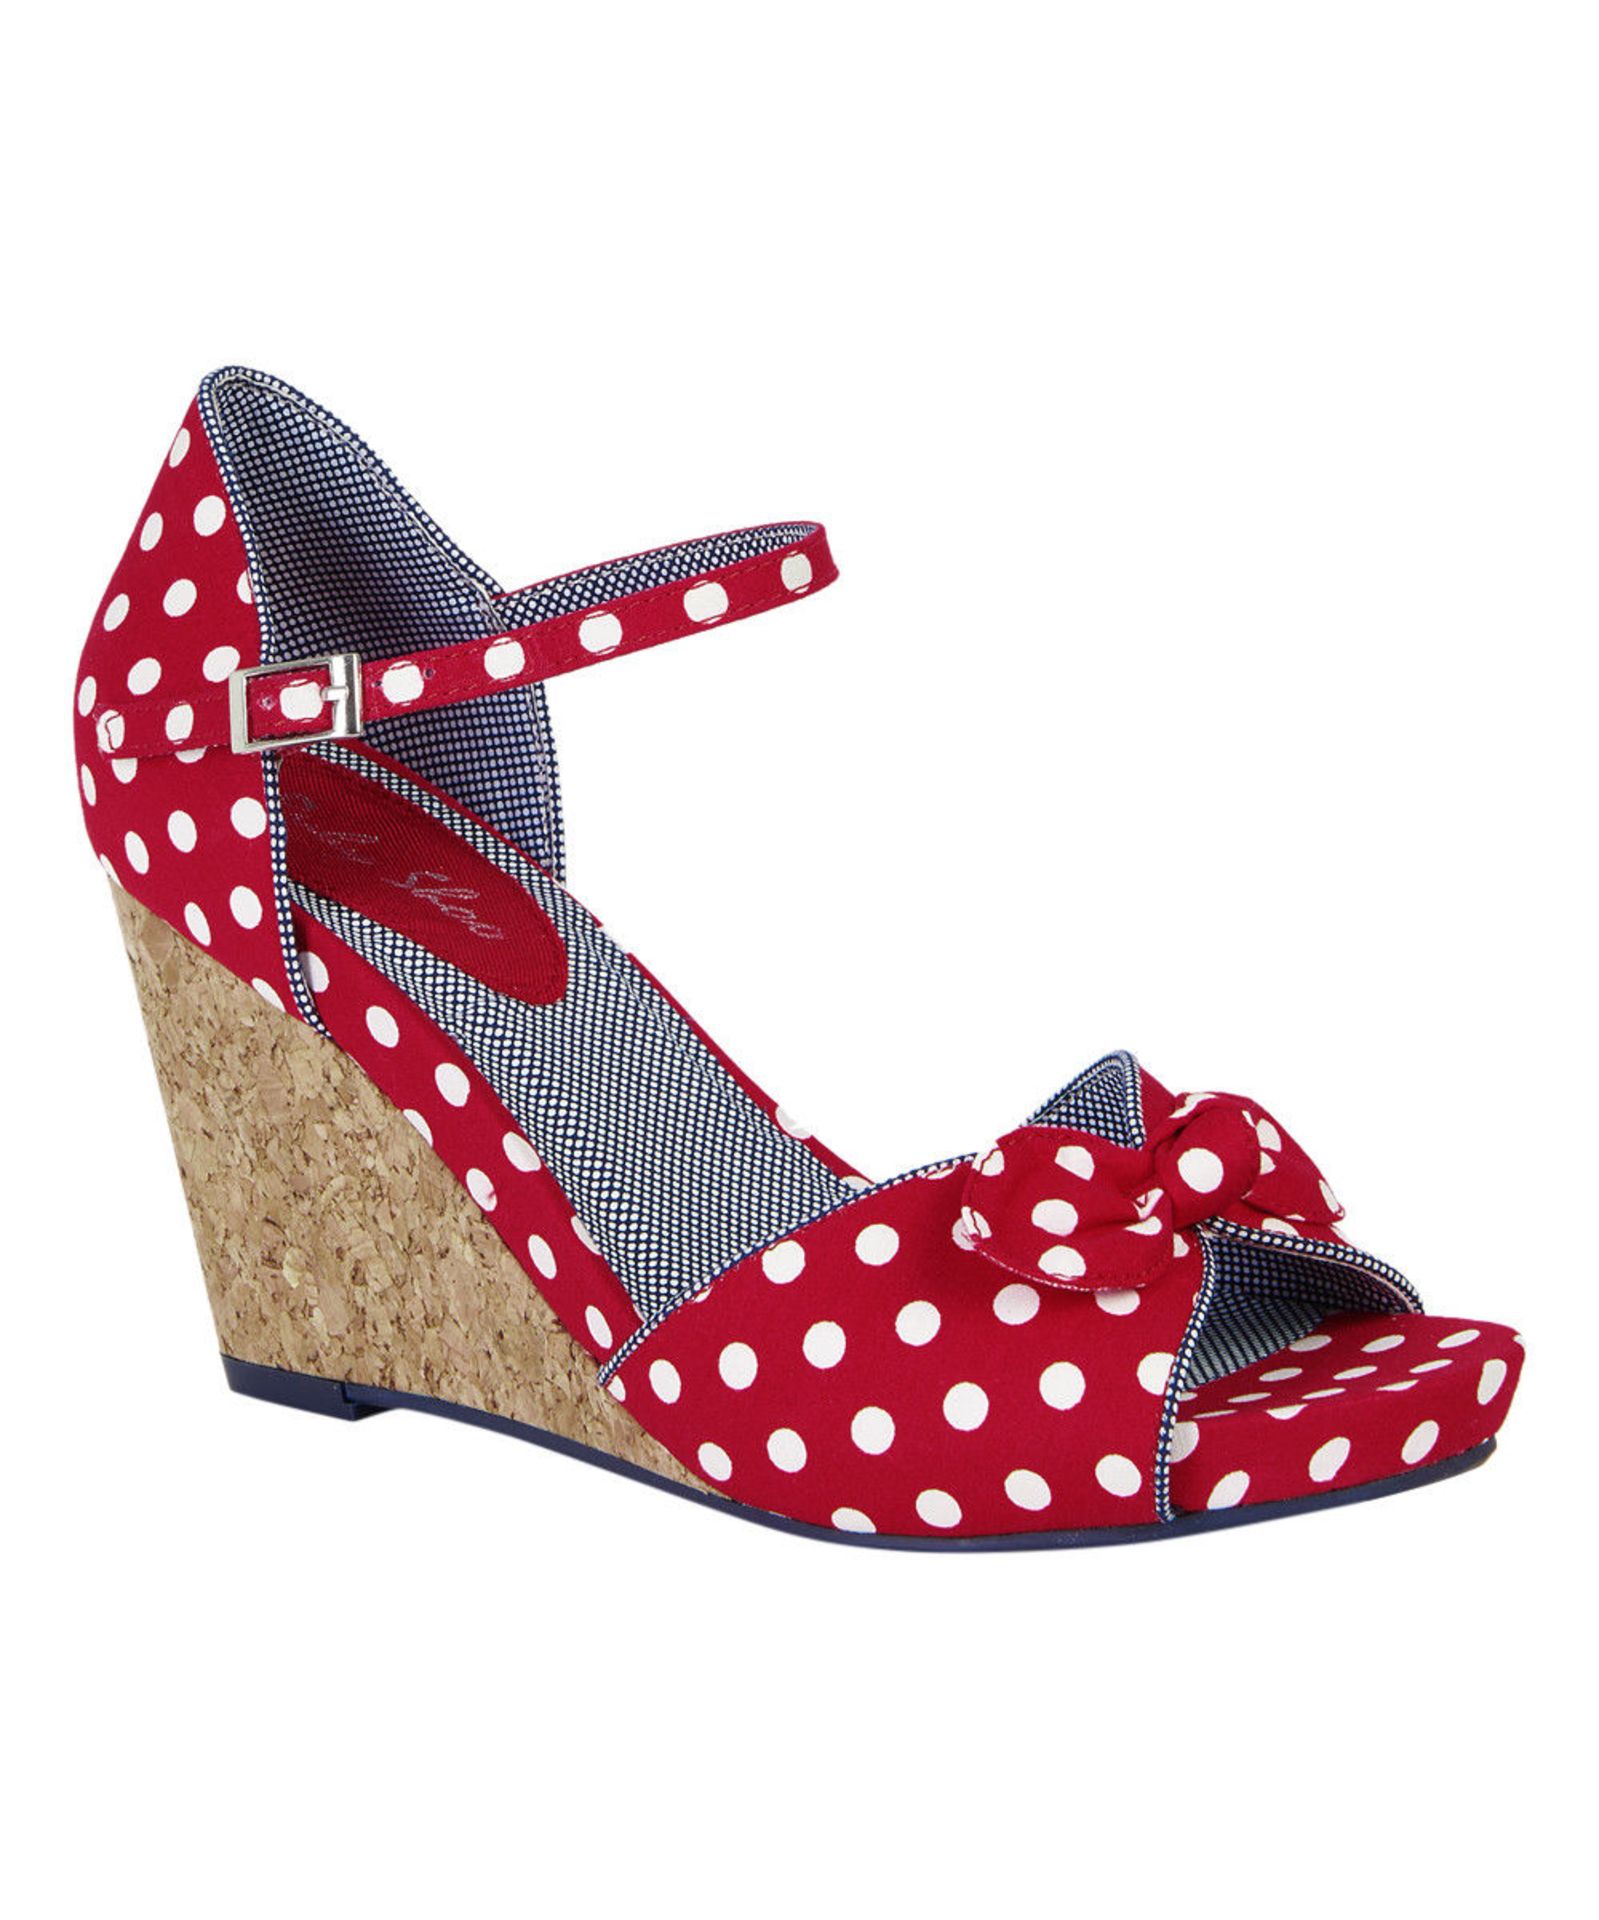 Ruby Shoo Red Polka Dot Molly Wedge Sandal (Uk Size:4/Euro Size:37) (New With Box) [Ref: 49603457-